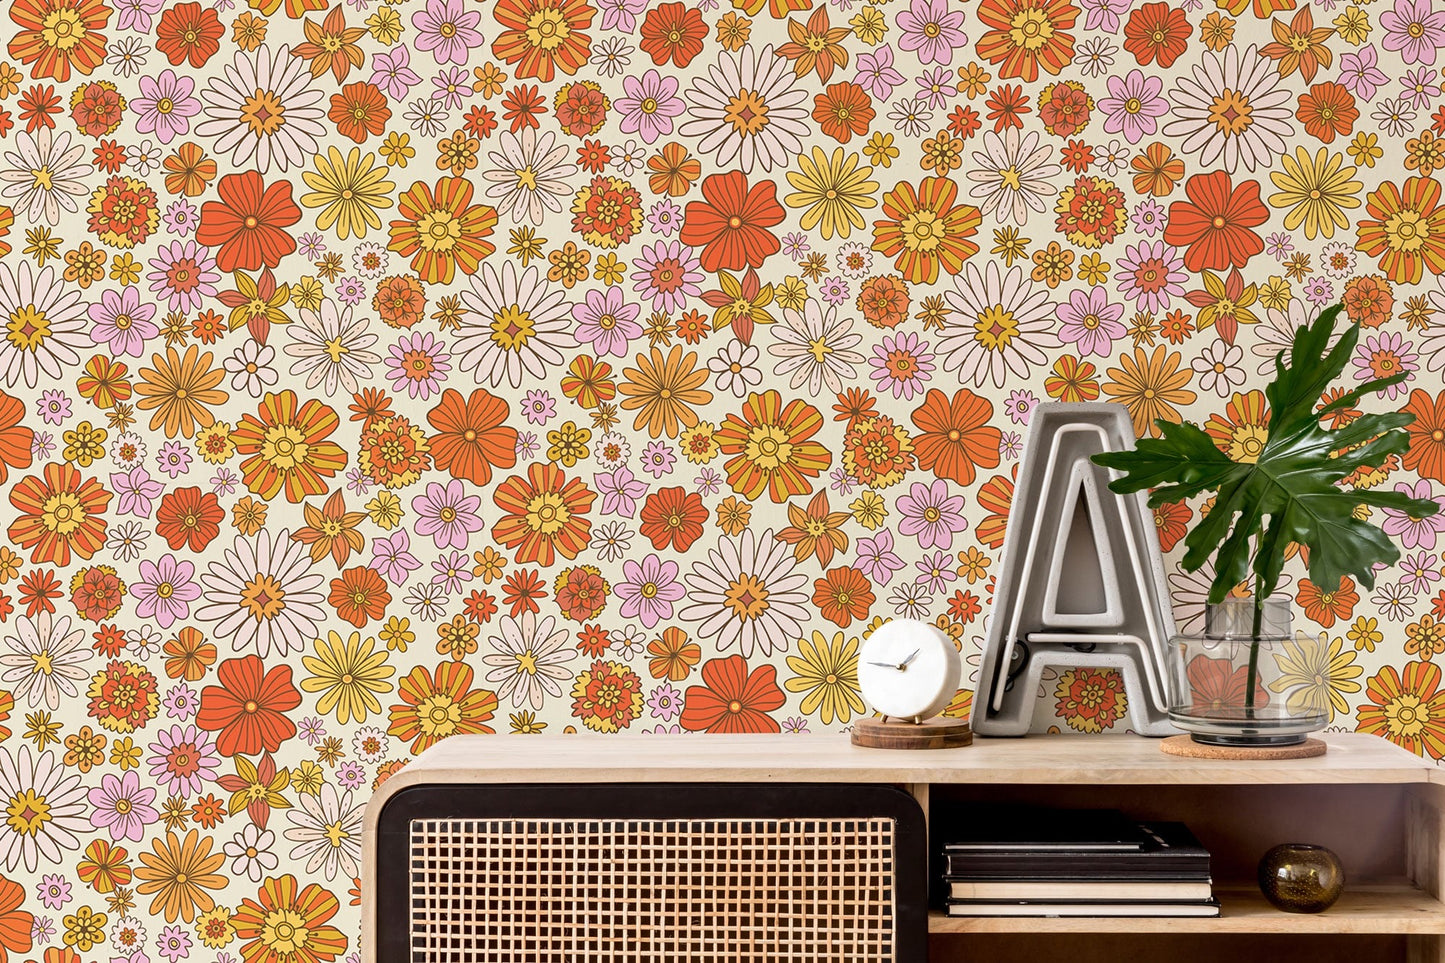 1970s Vintage-Inspired Flower Print Wallpaper - 70s Style Peel and Stick or Traditional Wallpaper